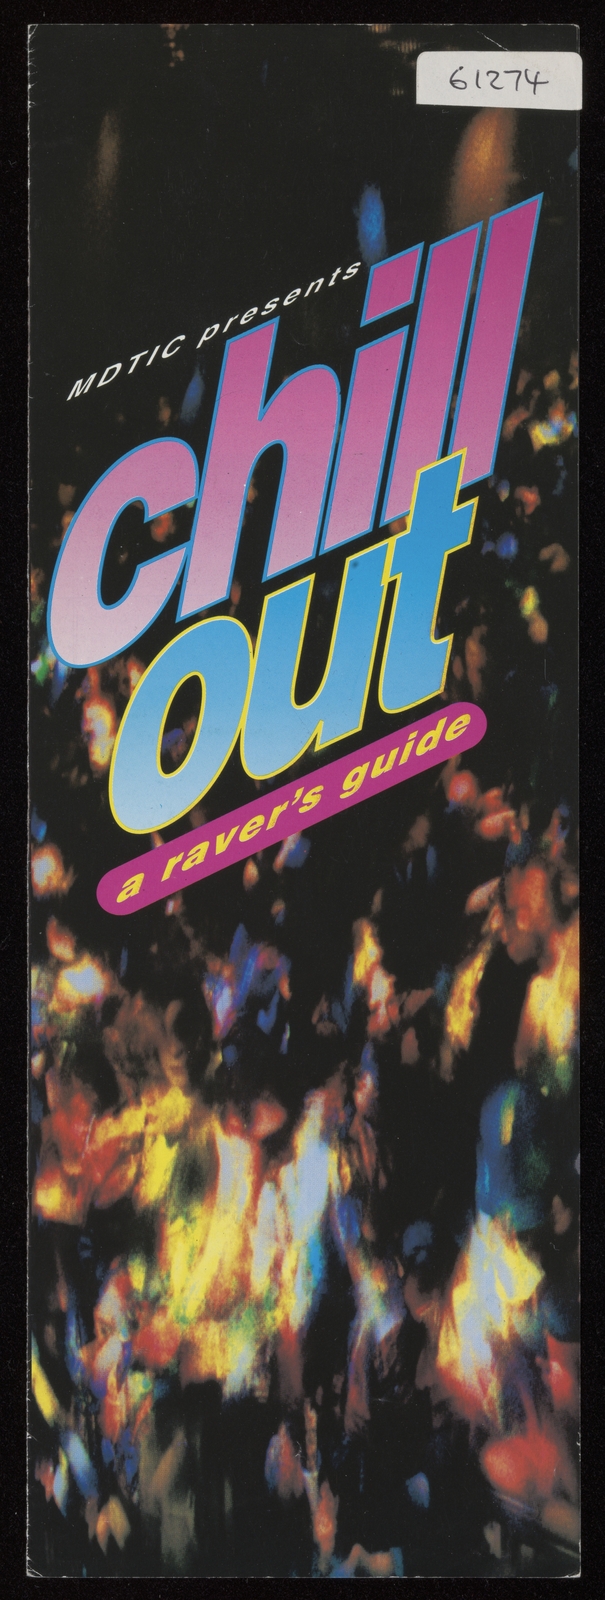 The colourful front cover of the 'Chill Out' pamphlet, with blue, pink and yellow lettering and abstract imagery behind suggesting a nightclub or rave.